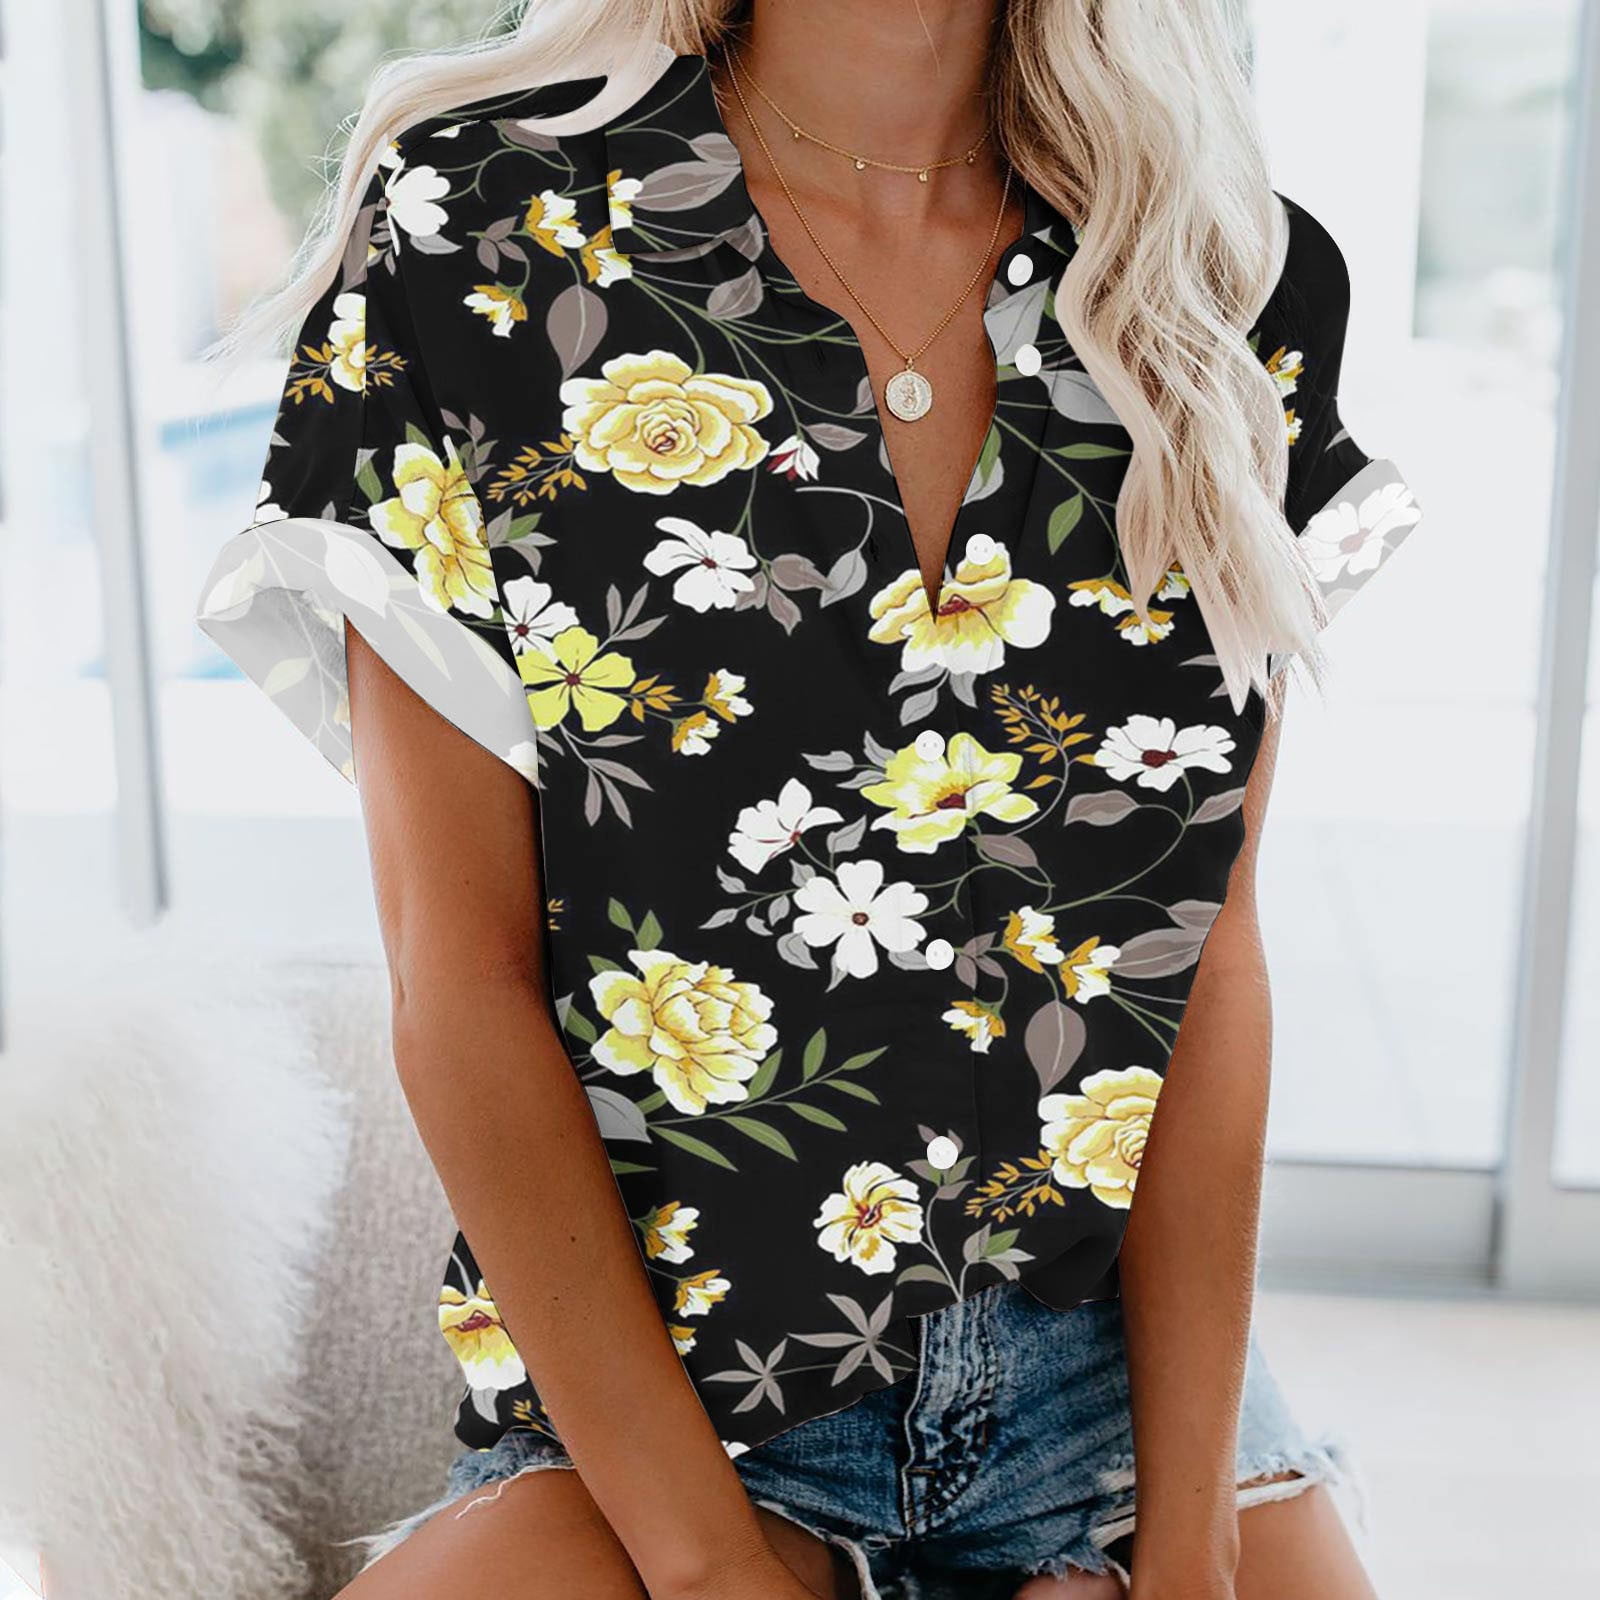 Wycnly Womens Tops Sunflower Print Short Sleeve V-Neck Tee Shirts Summer  Lightweight Plus Size Lapel Button Cardigan Blouses Black XXXL Clearance